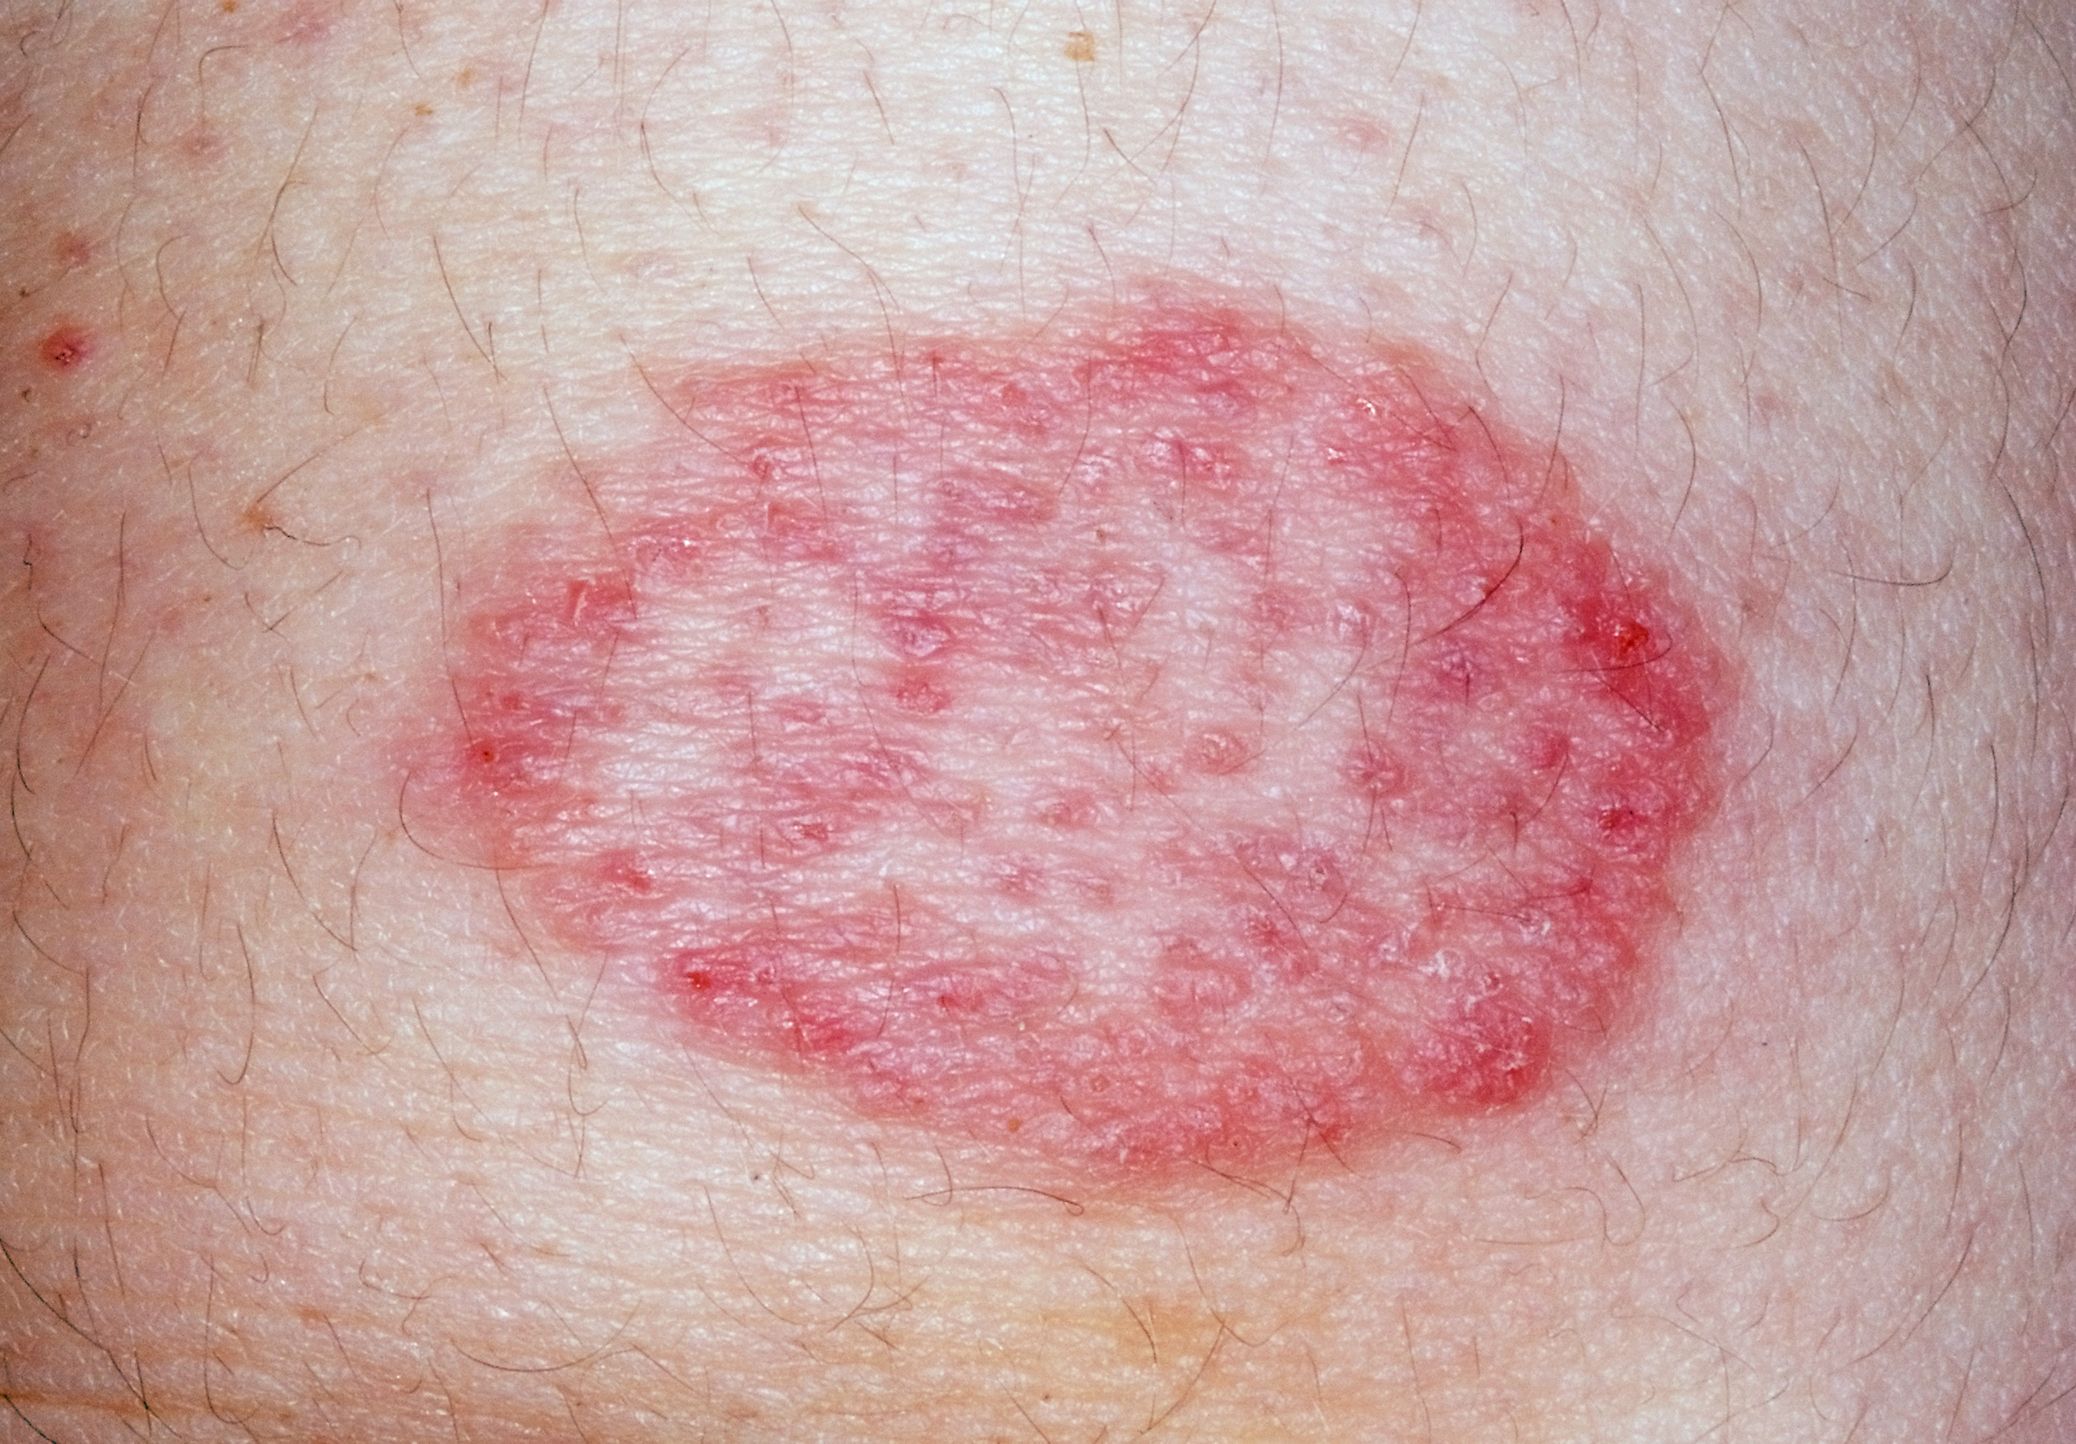 Red Spots on Skin - Causes and Treatment